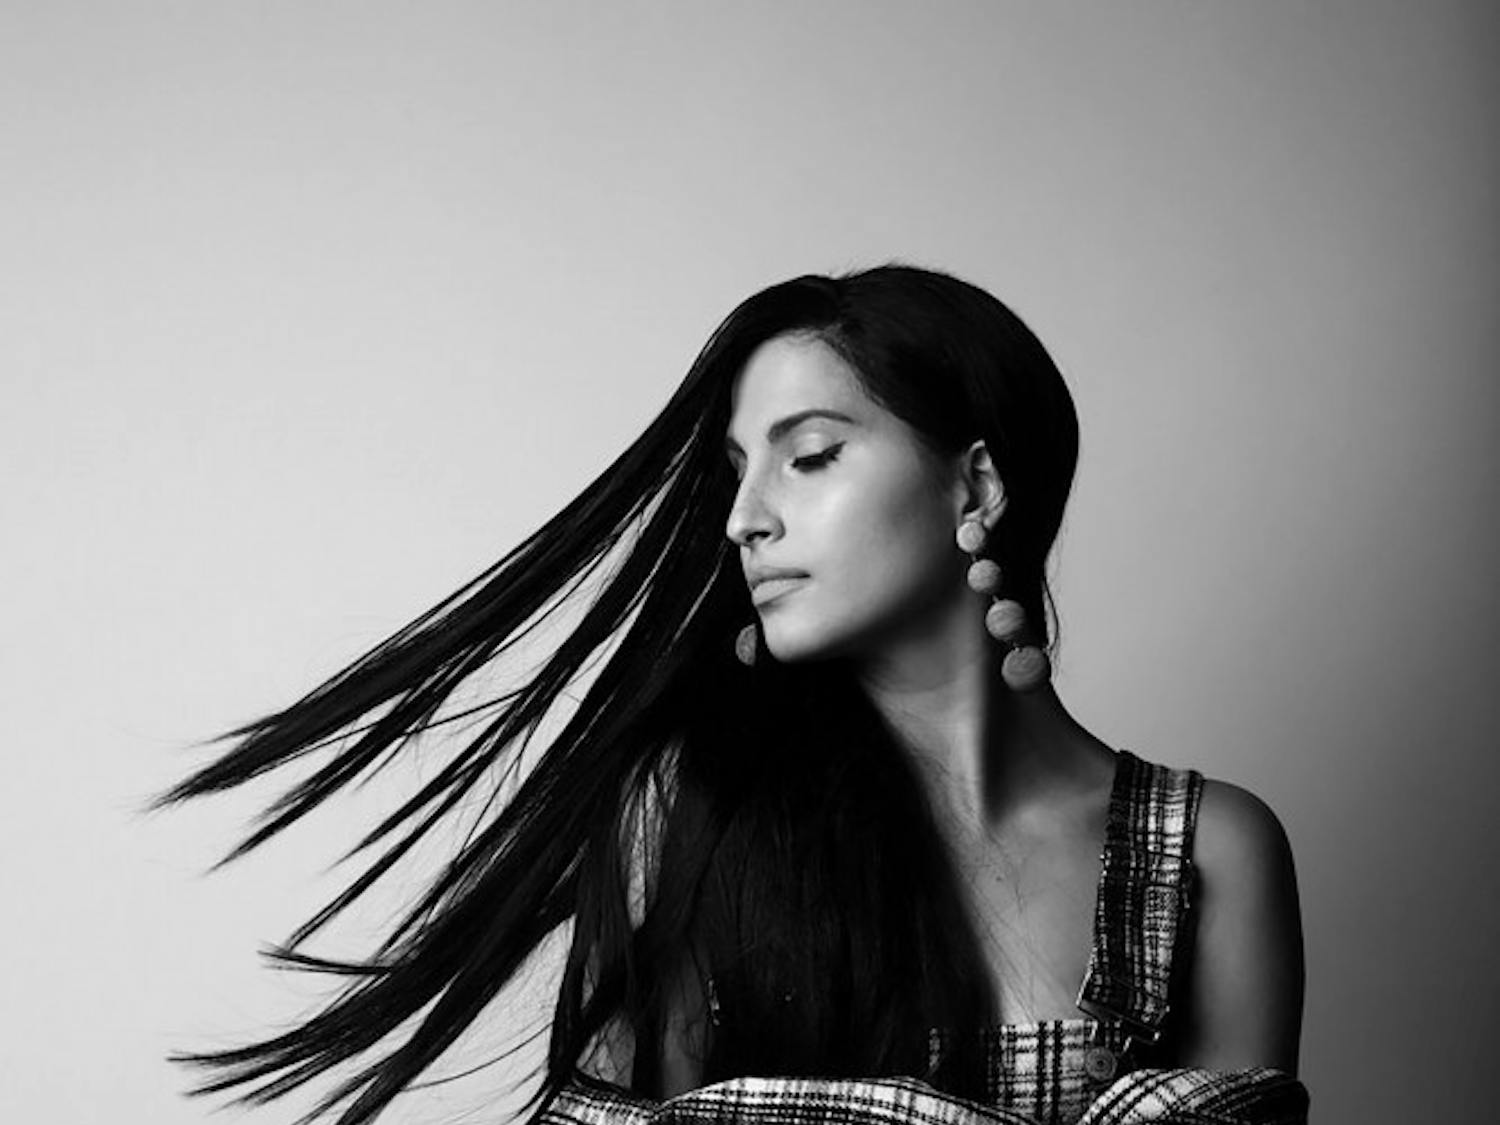 R&B singer Snoh Aalegra opens for Daniel Caesar at Danforth Music Hall in Toronto for five straight nights starting Dec. 16. Aalegra talked to The Spectrum about these shows and the vision behind new album "Feels."